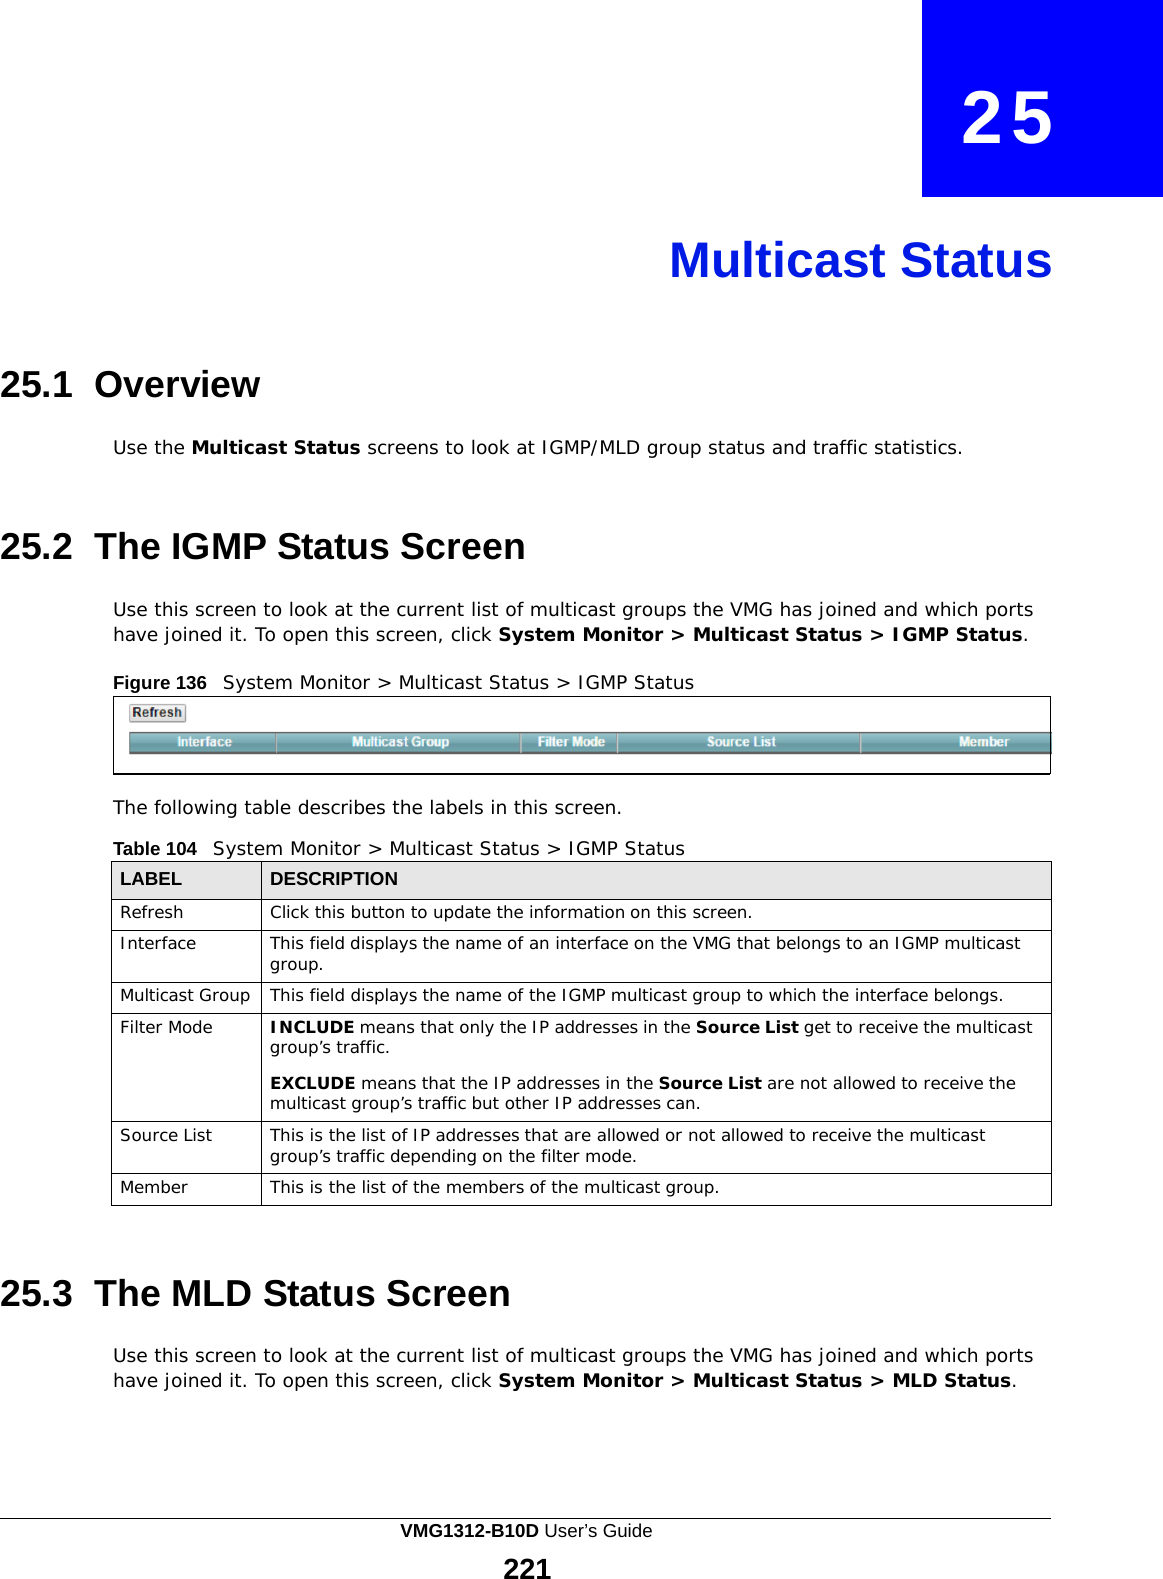    25     Multicast Status     25.1 Overview  Use the Multicast Status screens to look at IGMP/MLD group status and traffic statistics.    25.2  The IGMP Status Screen  Use this screen to look at the current list of multicast groups the VMG has joined and which ports have joined it. To open this screen, click System Monitor &gt; Multicast Status &gt; IGMP Status.  Figure 136   System Monitor &gt; Multicast Status &gt; IGMP Status      The following table describes the labels in this screen.  Table 104   System Monitor &gt; Multicast Status &gt; IGMP Status  LABEL DESCRIPTION Refresh Click this button to update the information on this screen. Interface This field displays the name of an interface on the VMG that belongs to an IGMP multicast group. Multicast Group This field displays the name of the IGMP multicast group to which the interface belongs. Filter Mode INCLUDE means that only the IP addresses in the Source List get to receive the multicast group’s traffic.  EXCLUDE means that the IP addresses in the Source List are not allowed to receive the multicast group’s traffic but other IP addresses can. Source List This is the list of IP addresses that are allowed or not allowed to receive the multicast group’s traffic depending on the filter mode. Member This is the list of the members of the multicast group.    25.3 The MLD Status Screen  Use this screen to look at the current list of multicast groups the VMG has joined and which ports have joined it. To open this screen, click System Monitor &gt; Multicast Status &gt; MLD Status. VMG1312-B10D User’s Guide 221  